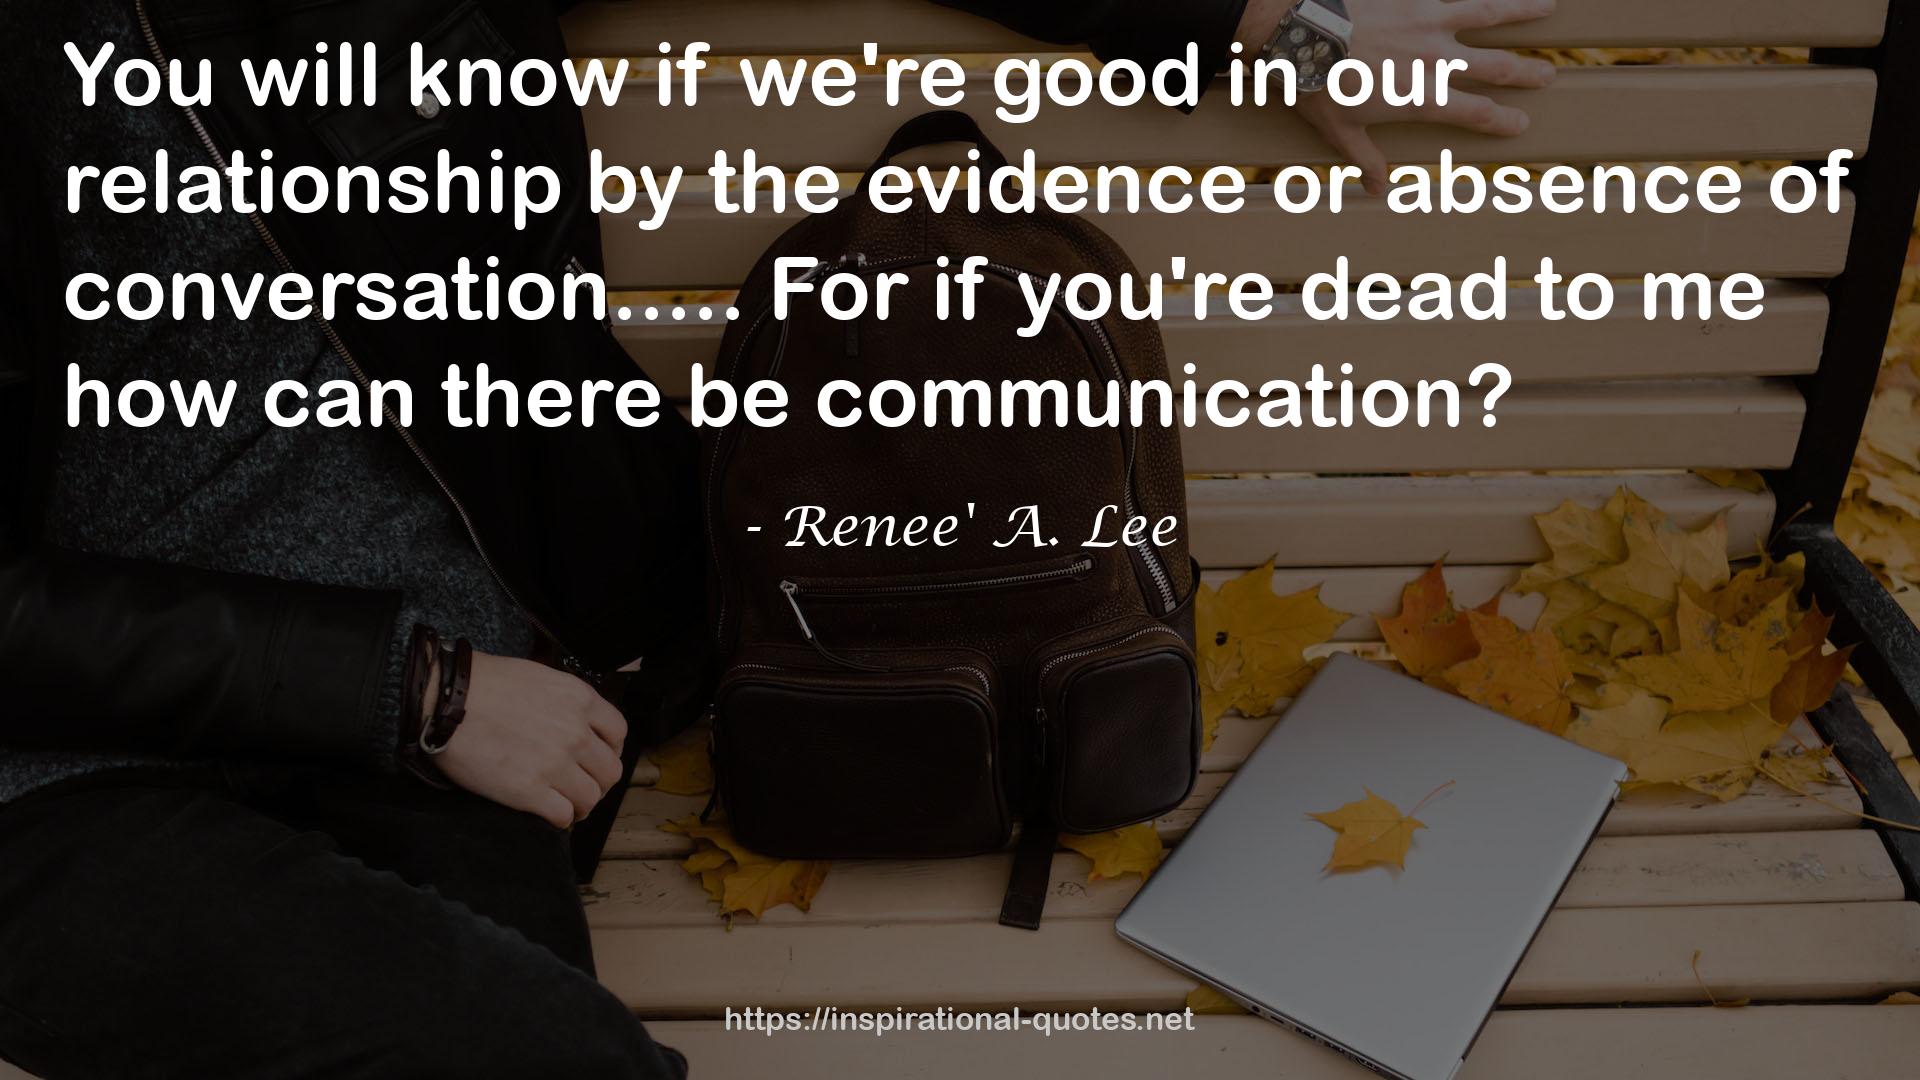 Renee' A. Lee QUOTES